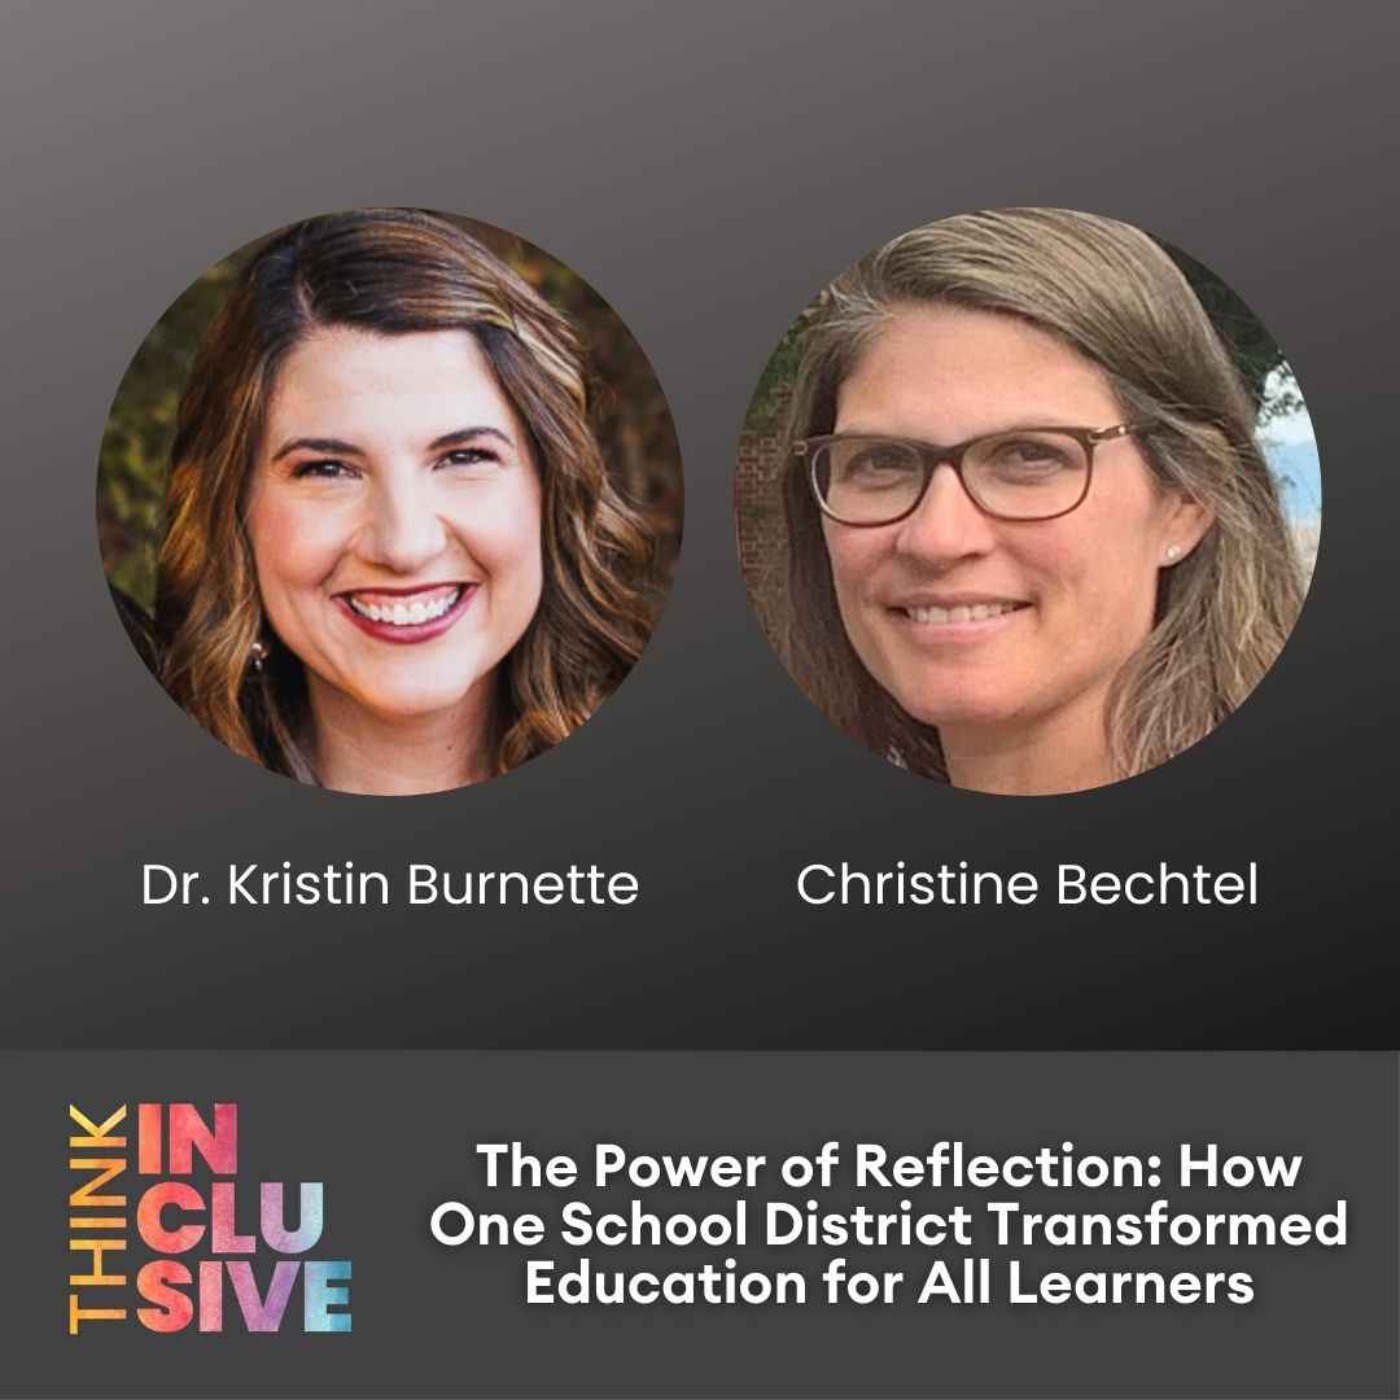 The Power of Reflection: How One School District Transformed Education for All Learners